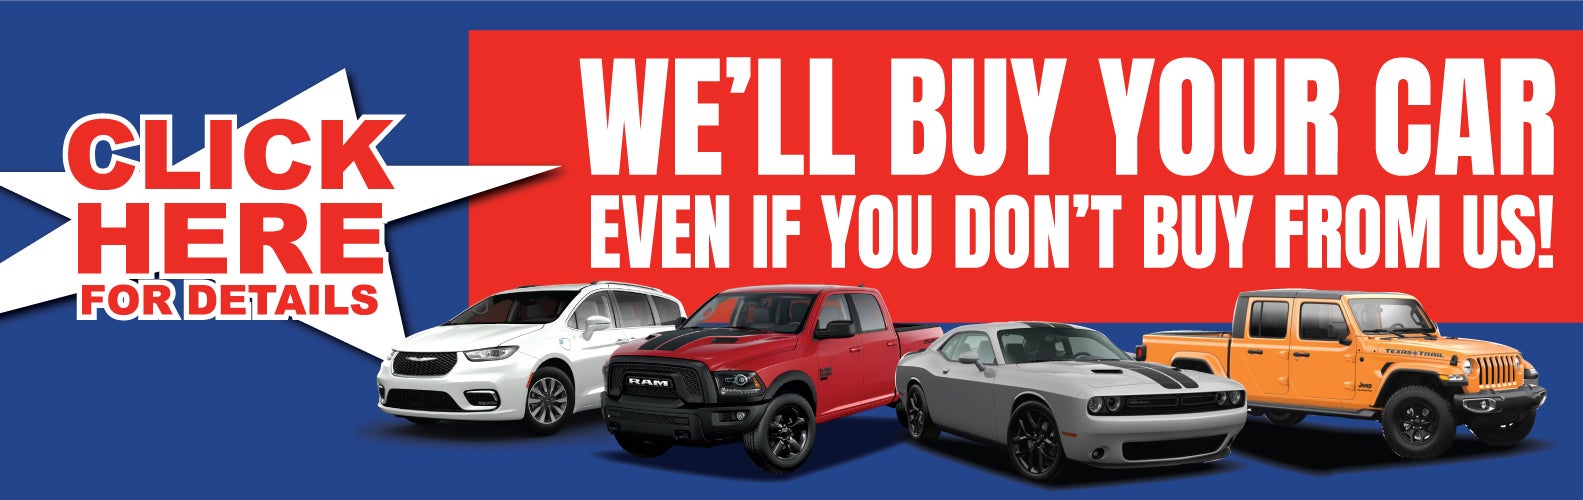 WE'LL BUY YOUR CAR, EVEN IF YOU DON;T BUY FROM US!